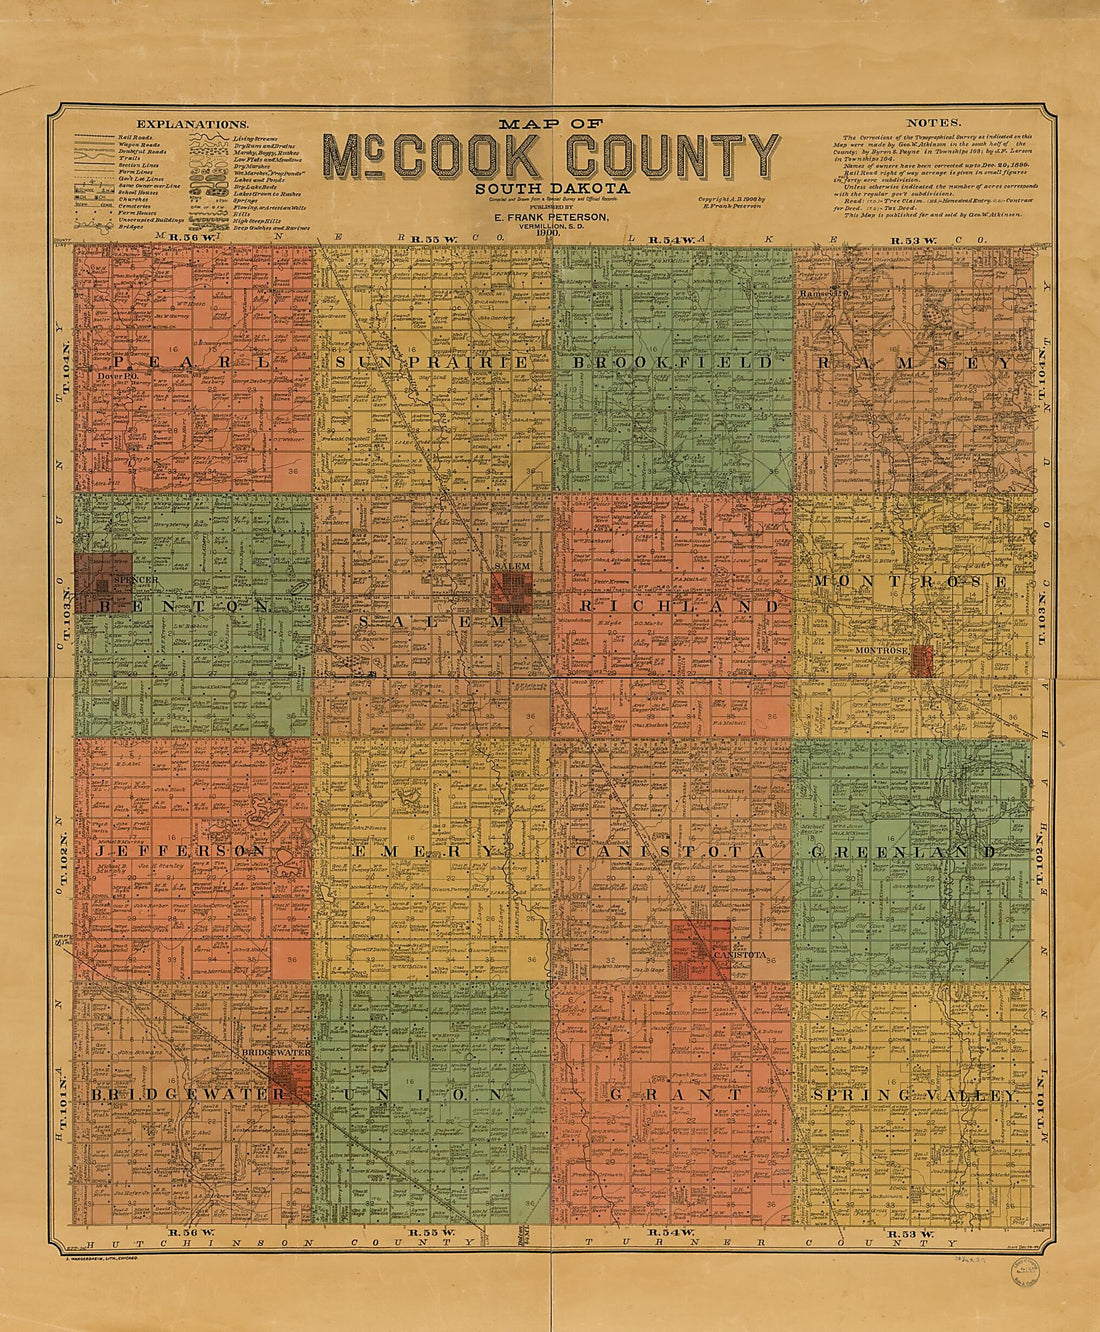 This old map of Map of McCook County, South Dakota : Compiled and Drawn from a Special Survey and Official Records from 1900 was created by E. Frank Peterson, S. Wangersheim in 1900